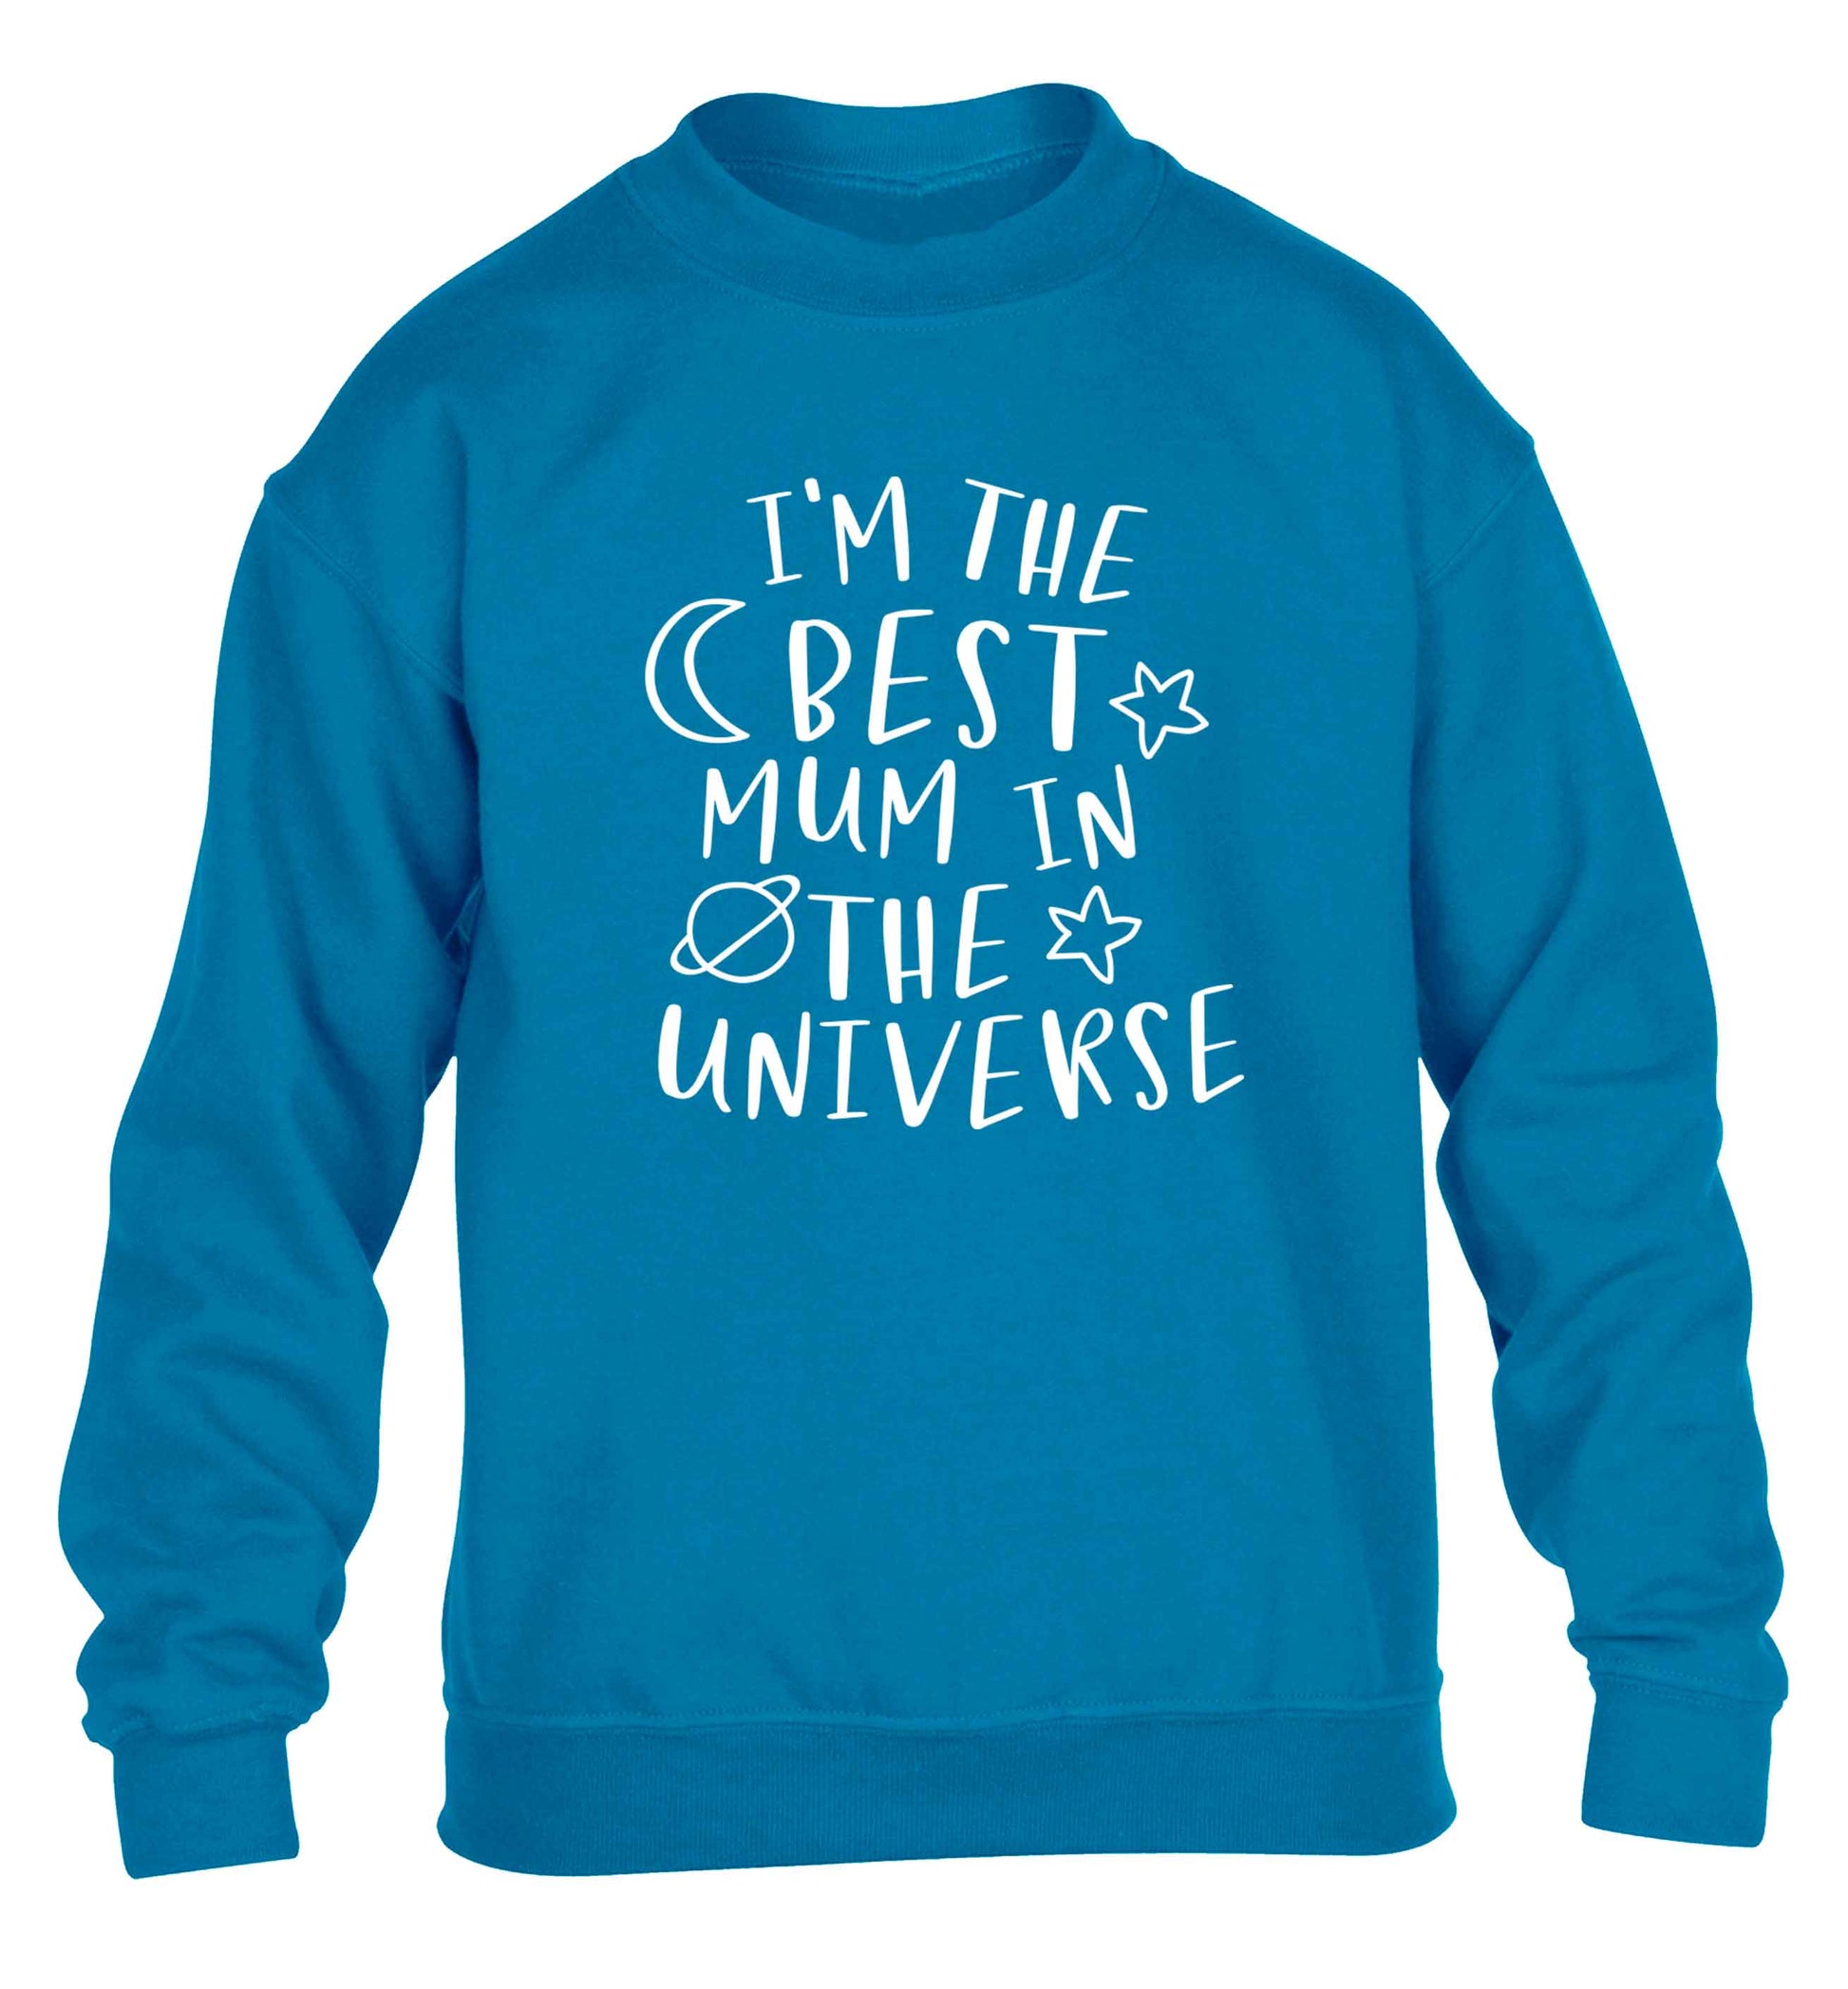 I'm the best mum in the universe children's blue sweater 12-13 Years